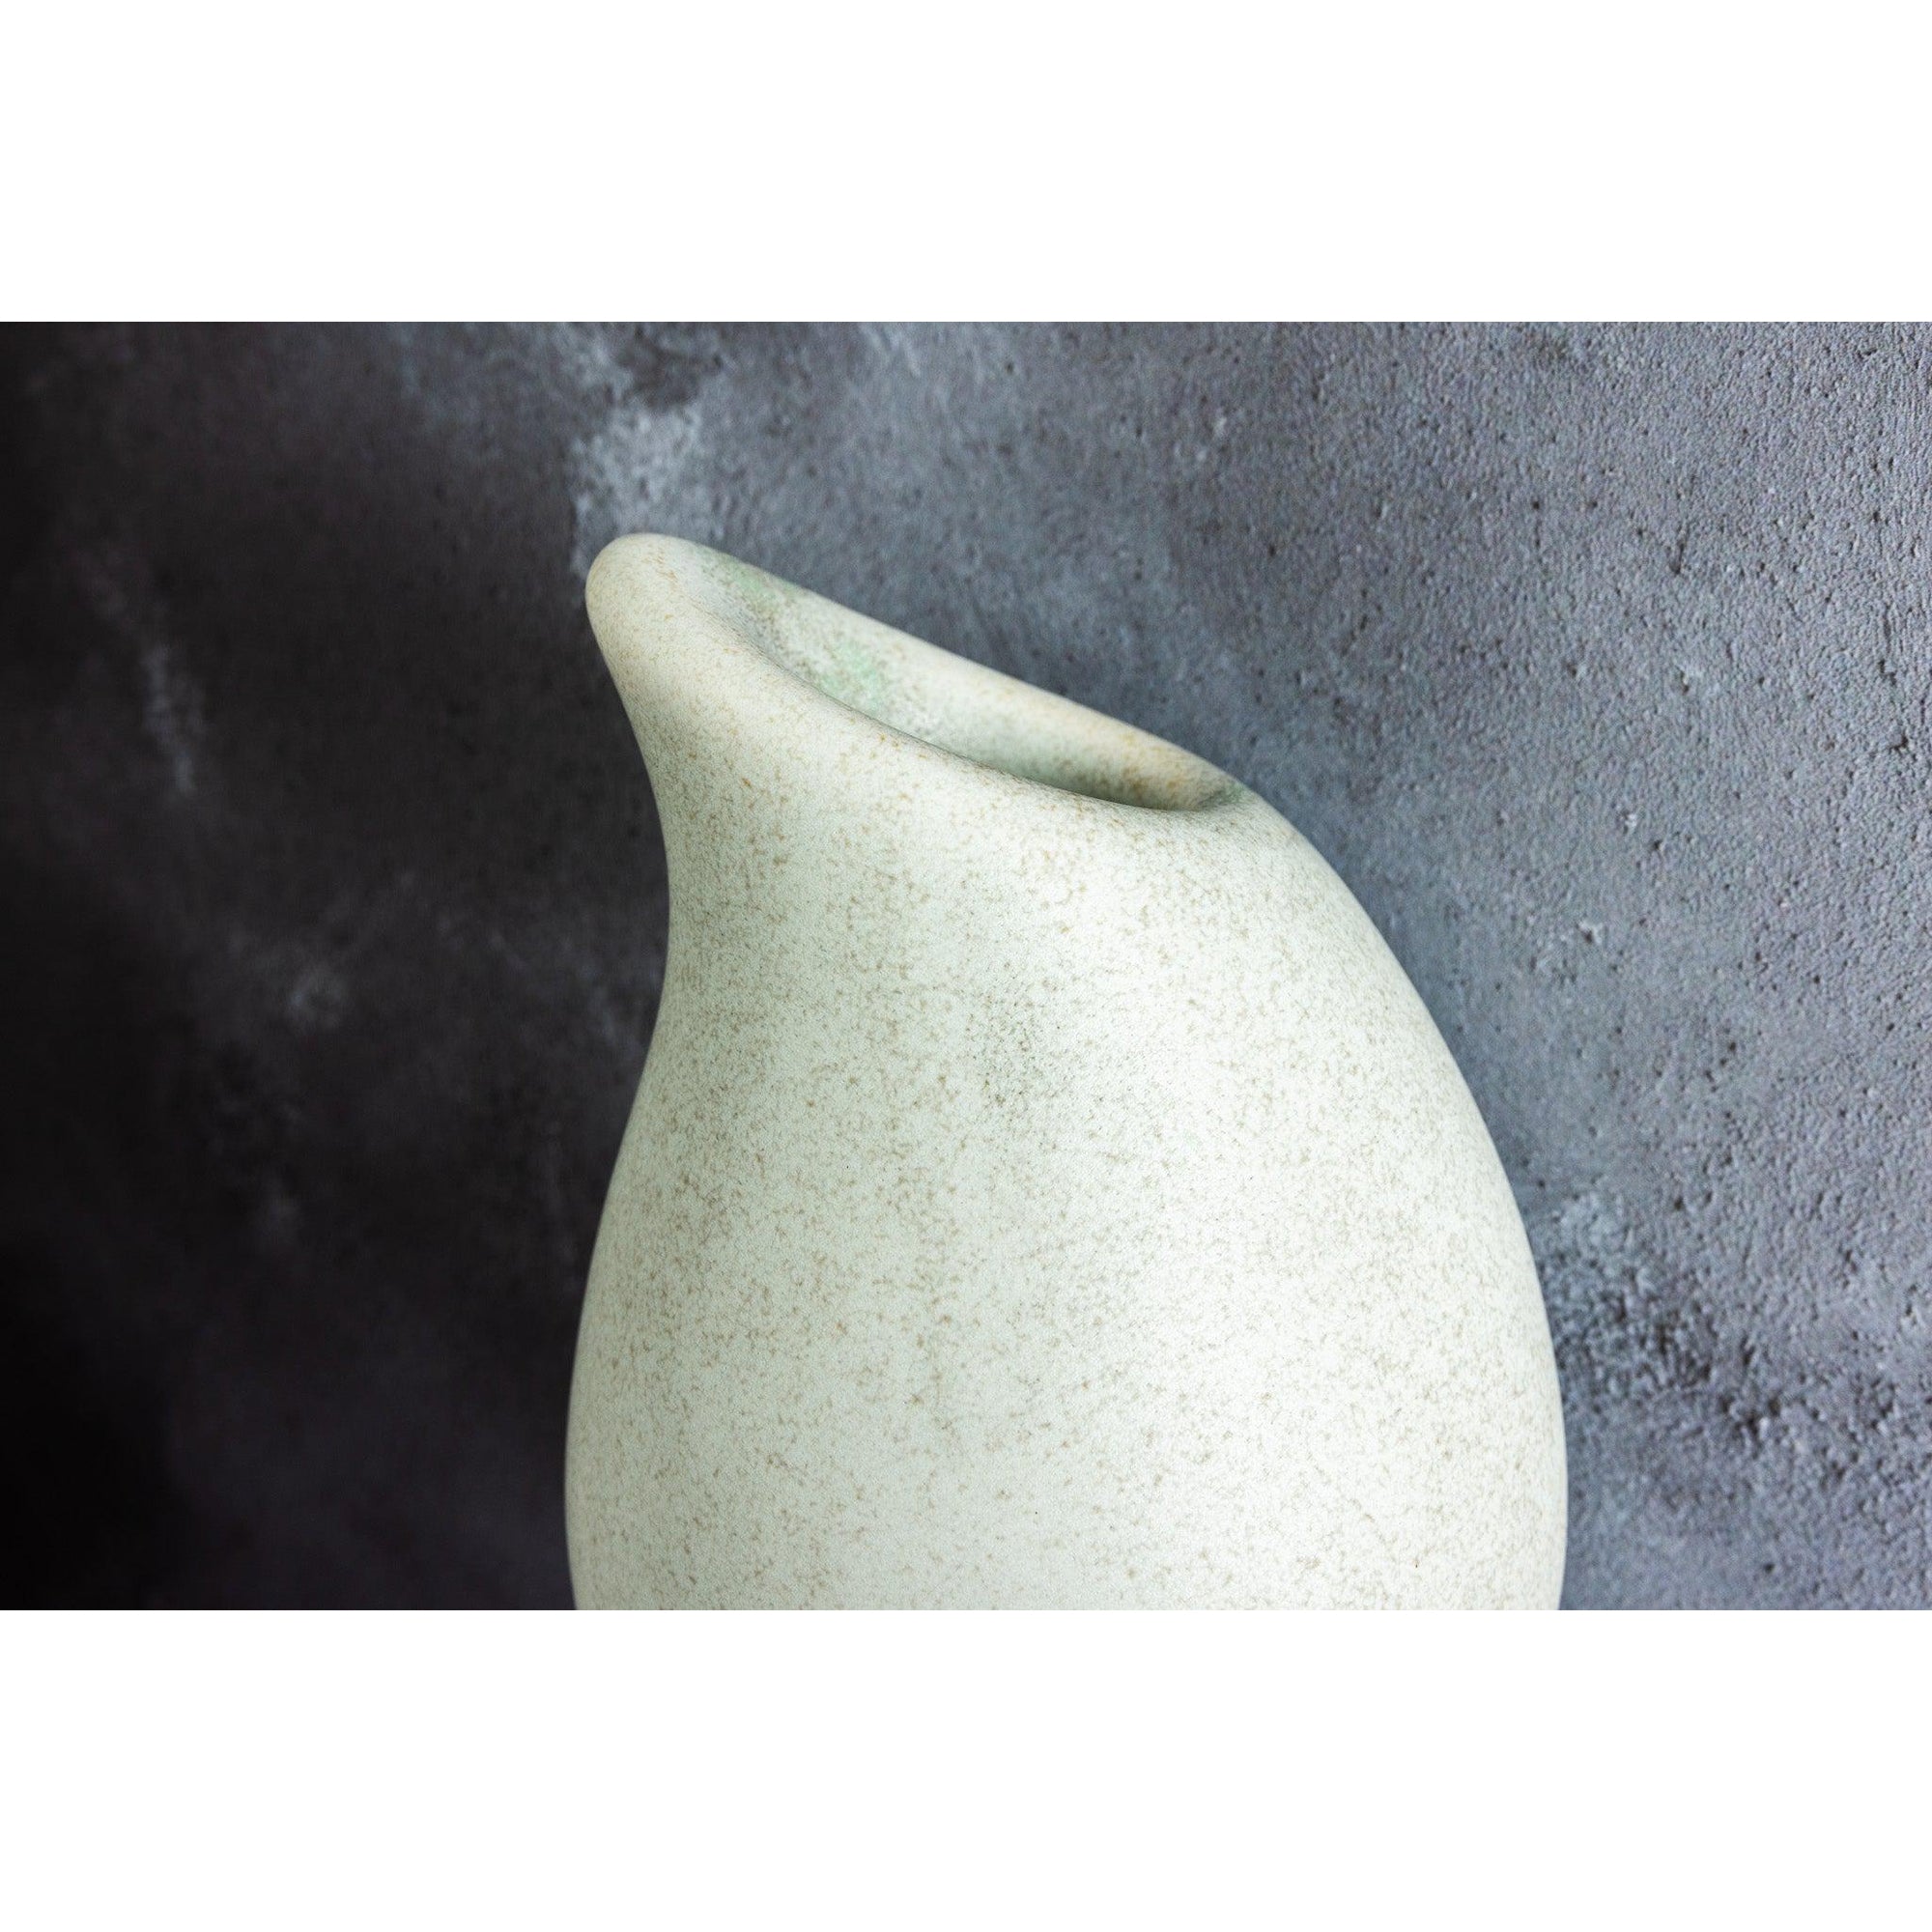 KSR5 Droplet Wall Vase by Kate Schuricht, available at Padstow Gallery, Cornwall